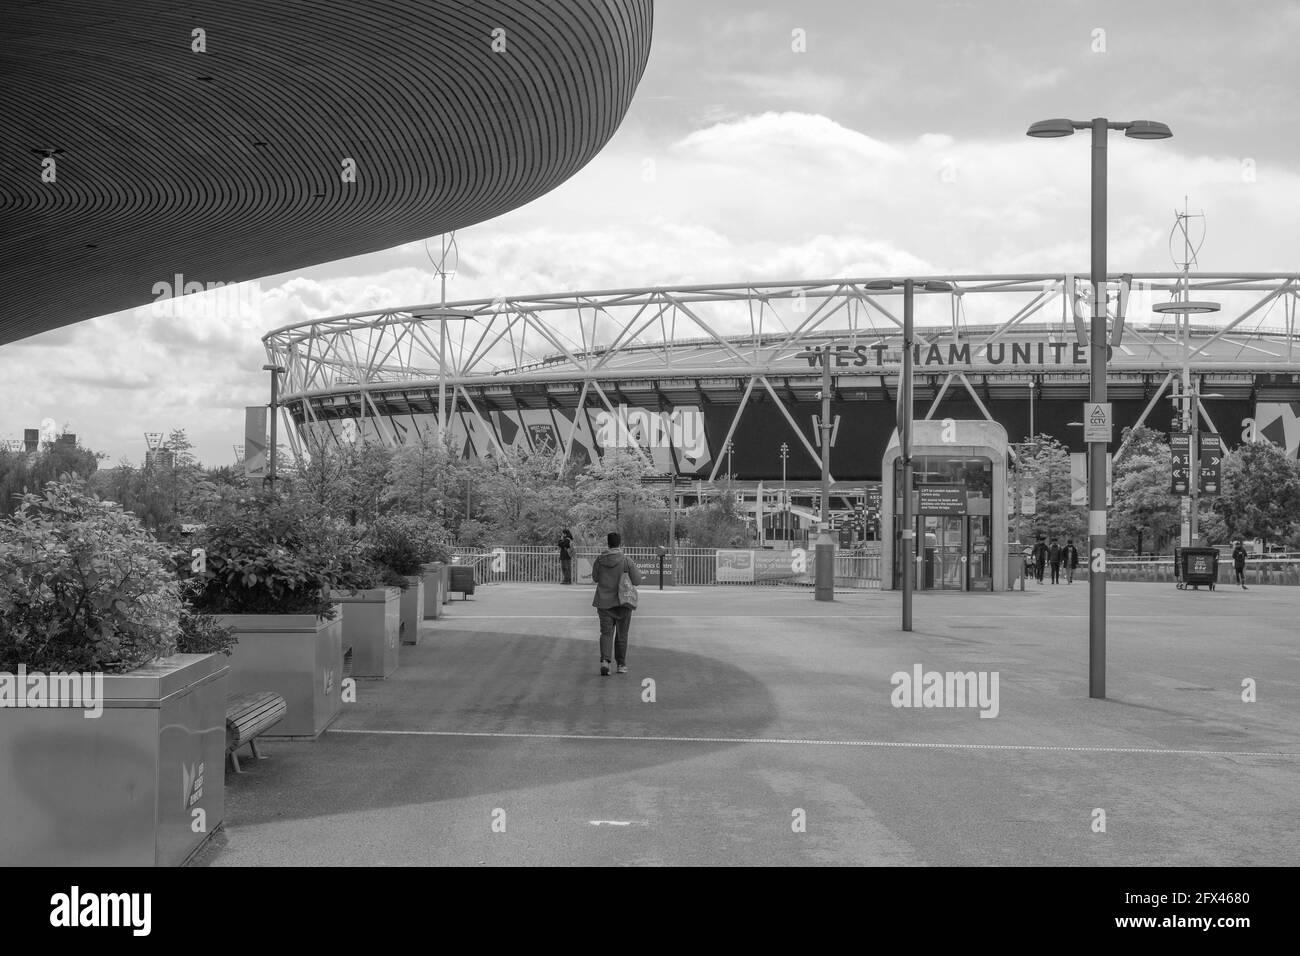 London Stadium, home of West Ham United Football Club in the Queen Elizabeth Olympic Park, Stratford, East London. Stock Photo